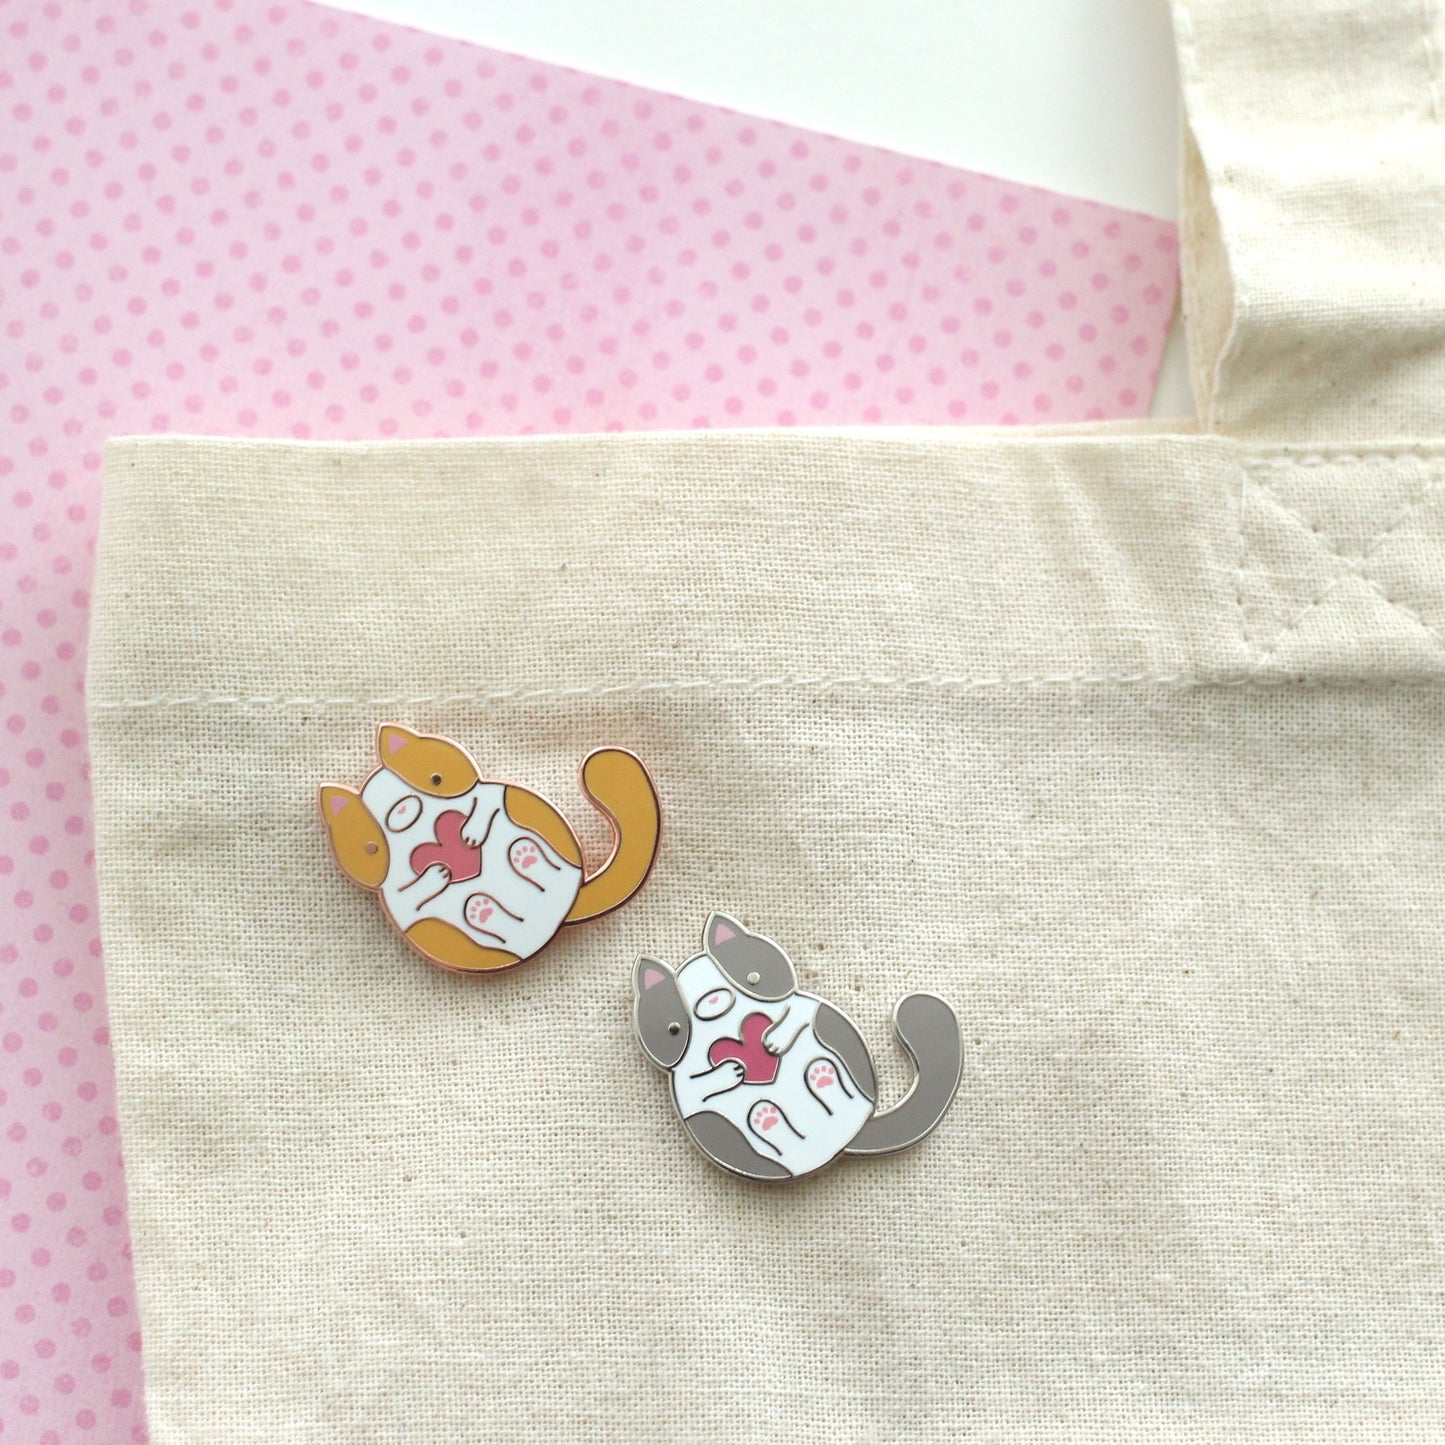 Bicolor Cat Pin Set. Cute Cat Gift. Enamel Pin Set by Wild Whimsy Woolies